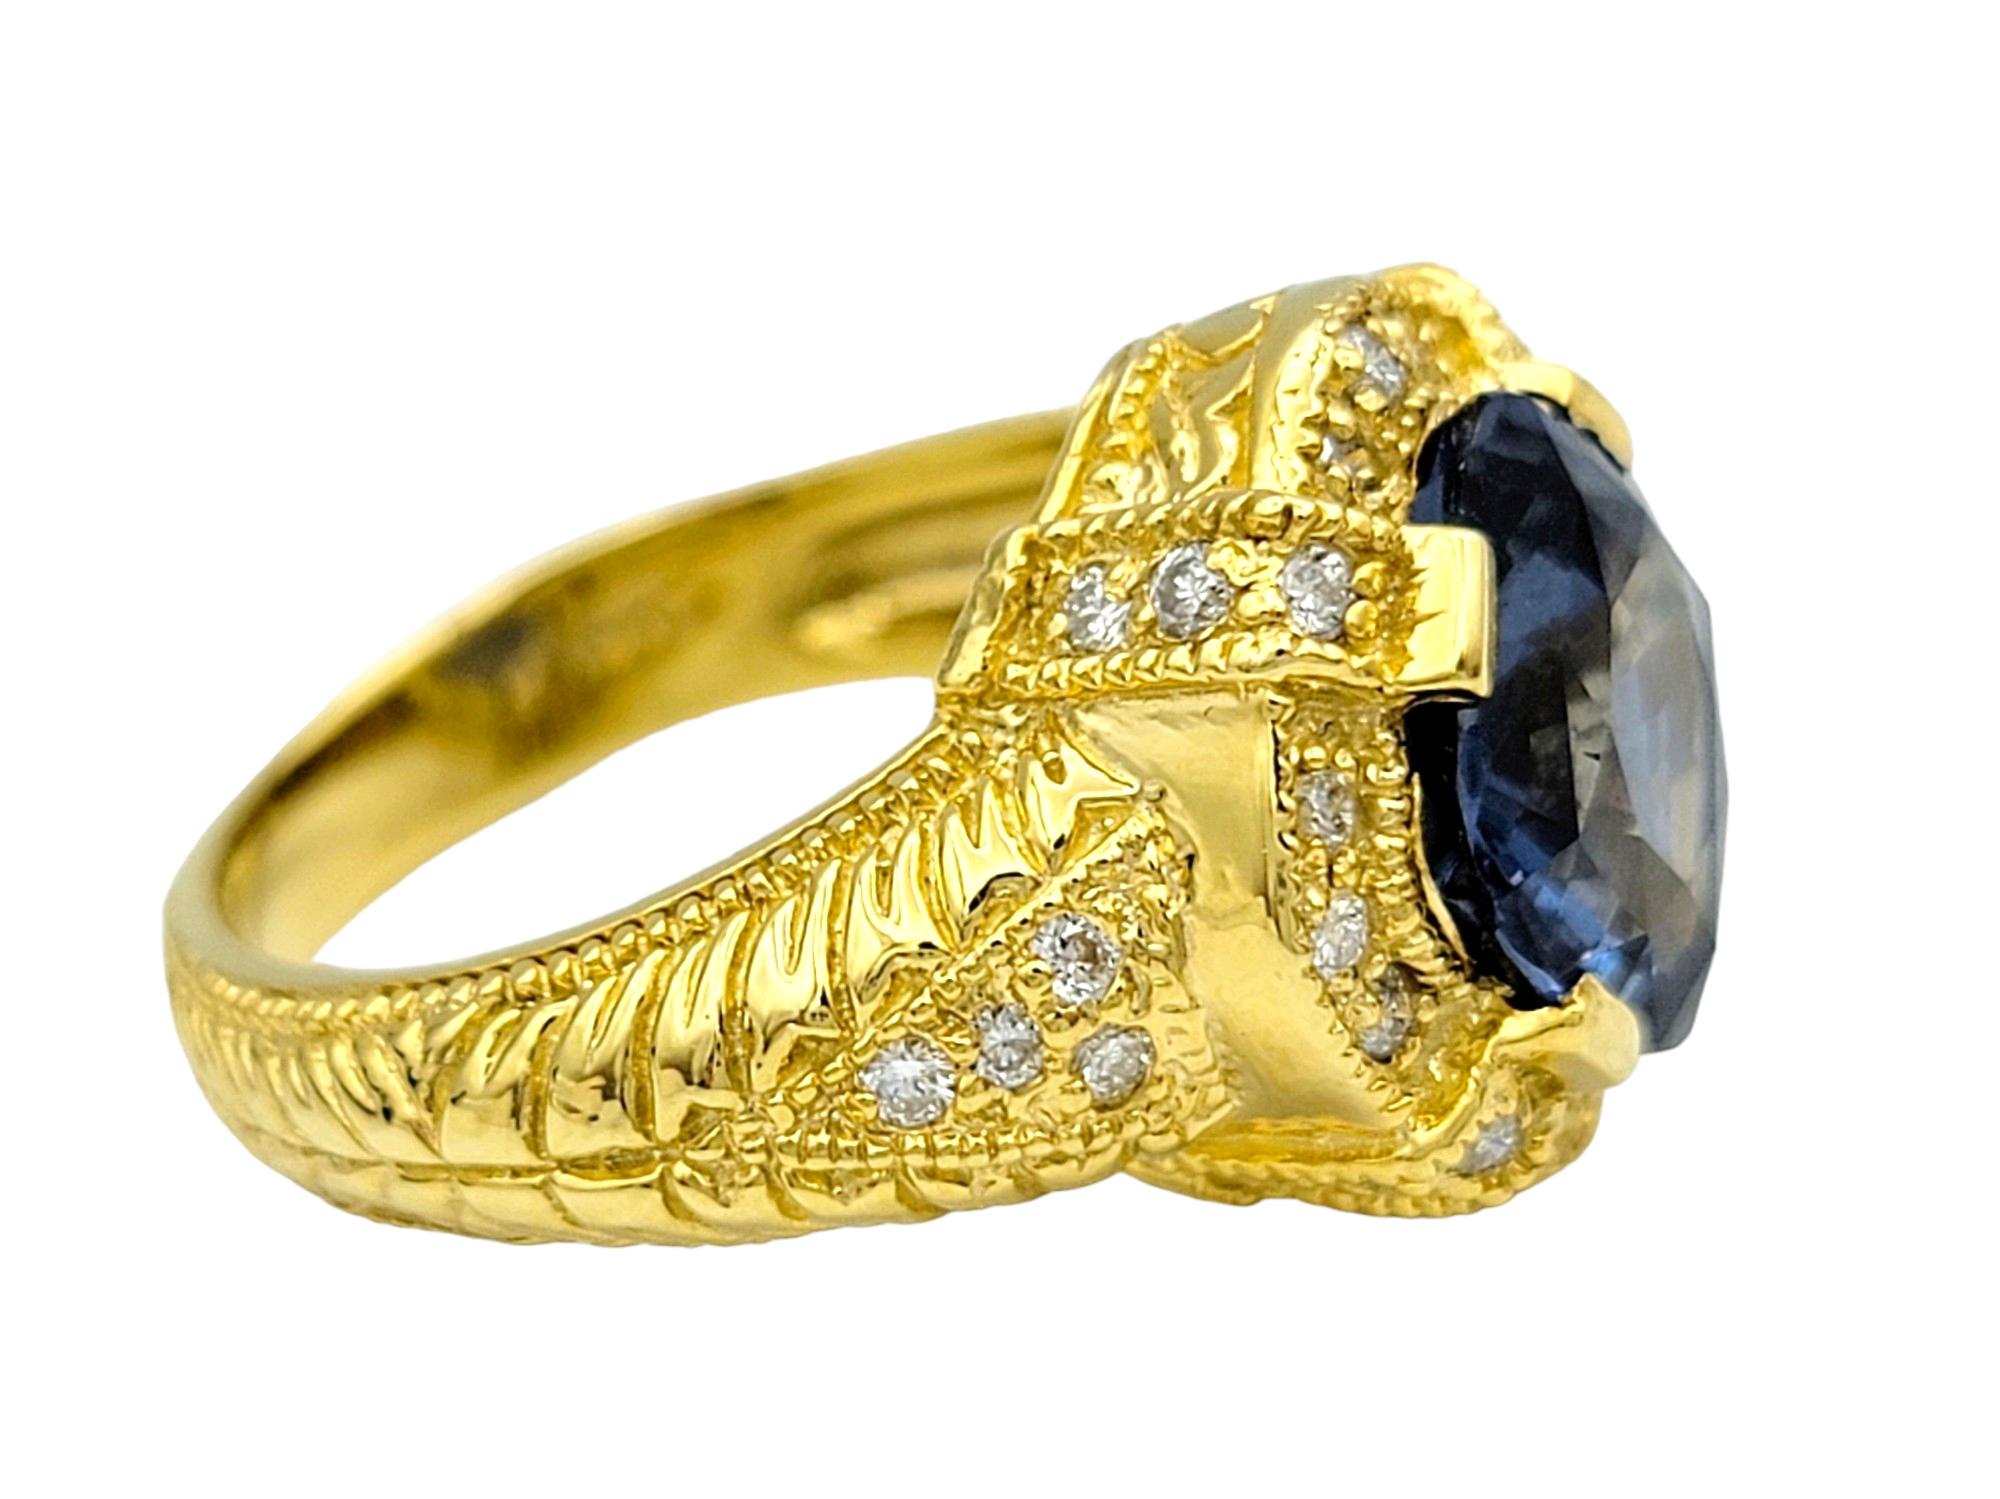 Cushion Cut Blue Spinel and Diamond Halo Cocktail Ring in 18 Karat Yellow Gold In Good Condition For Sale In Scottsdale, AZ